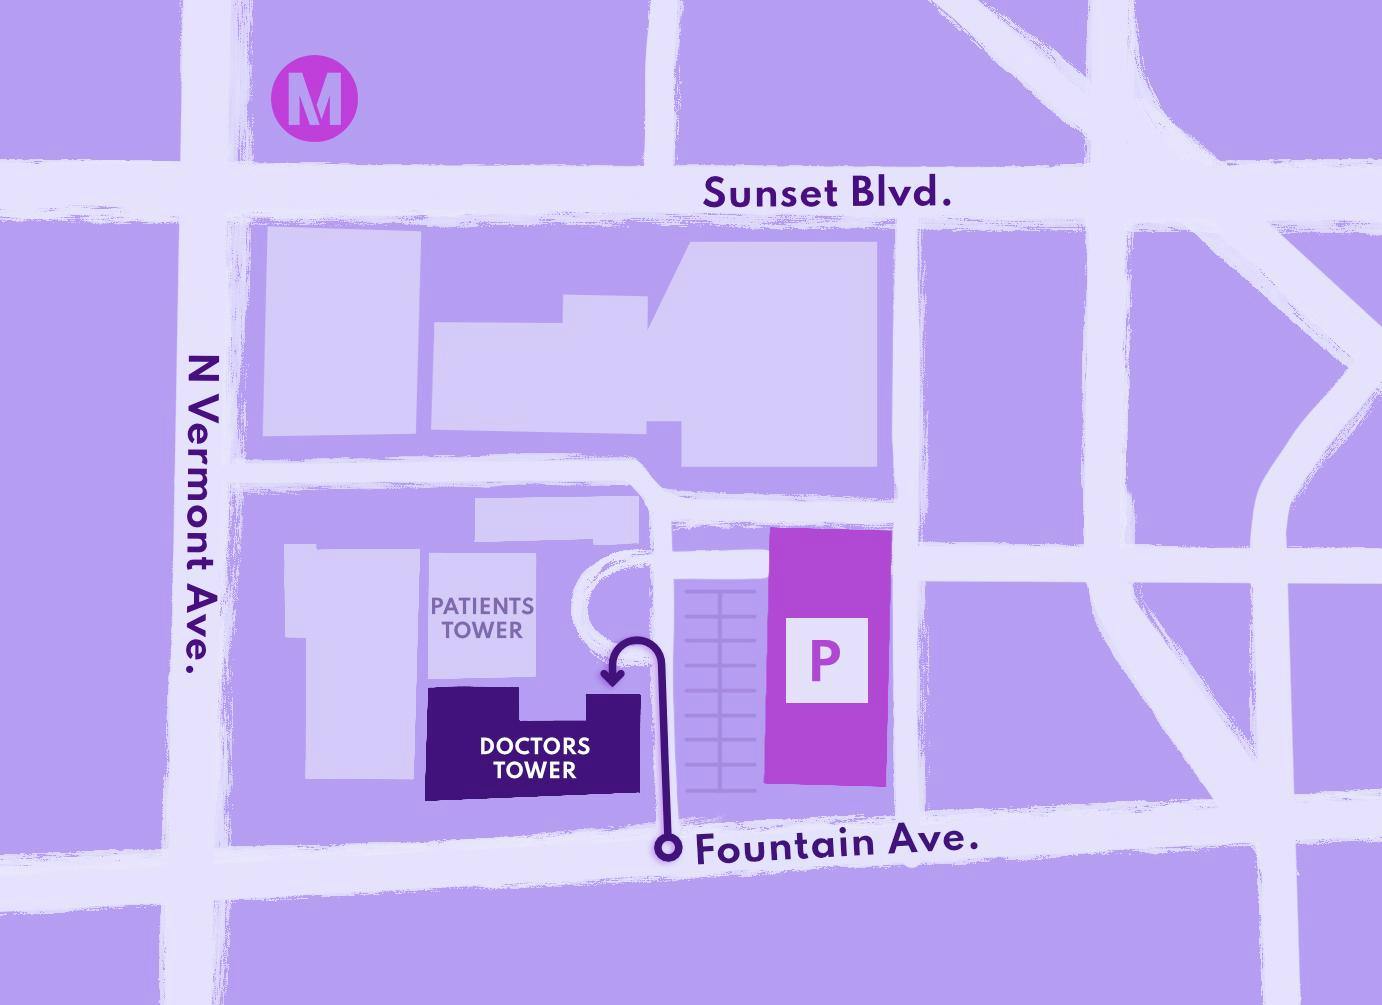 Map of the office location. To find our office, enter the hospital campus from Fountain Ave. Parking lot will be to your right.  Main entrance to Doctors’ Tower is on your left.